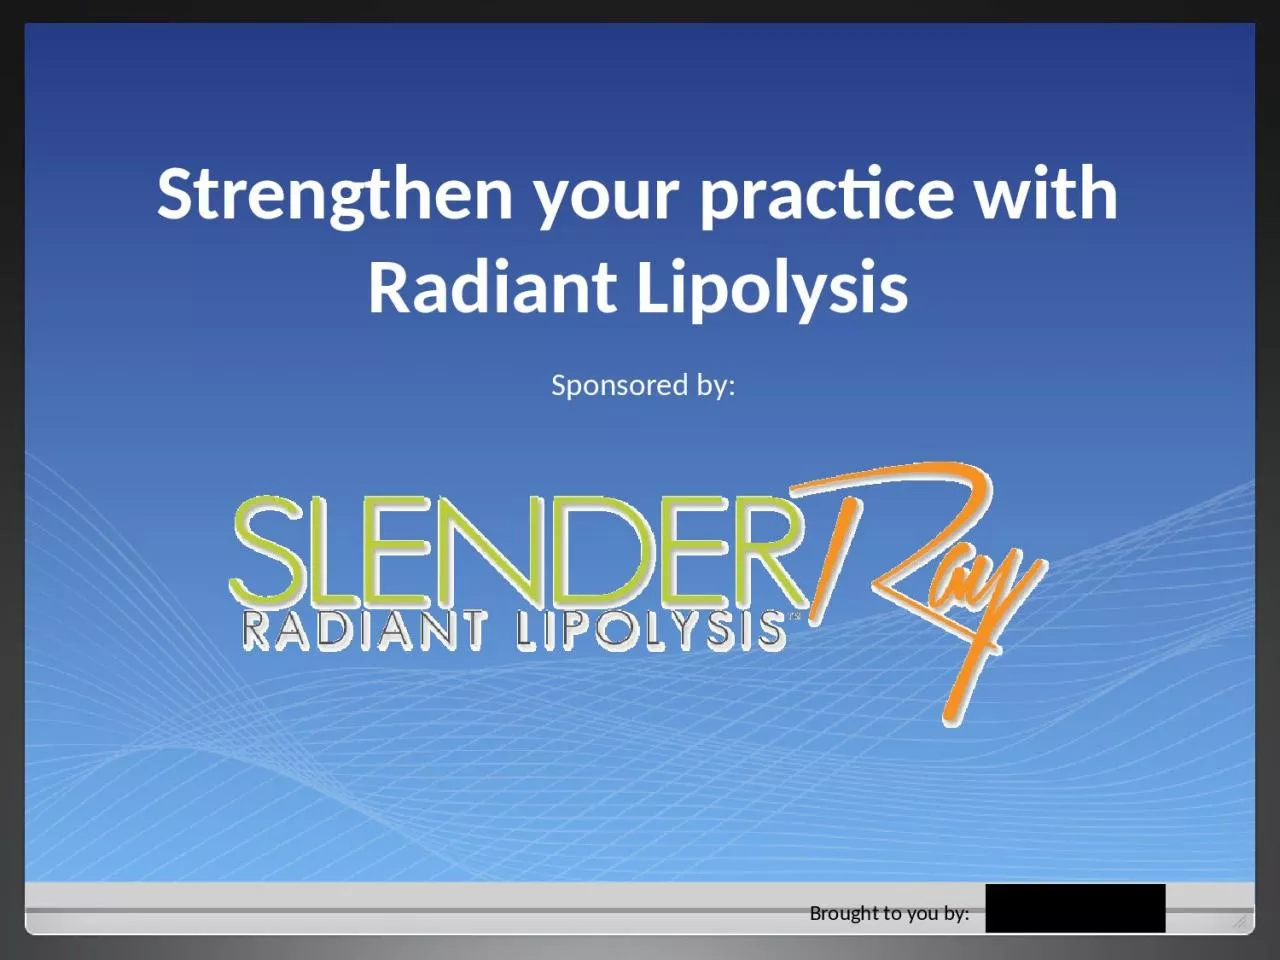 Brought to you by: Strengthen your practice with Radiant